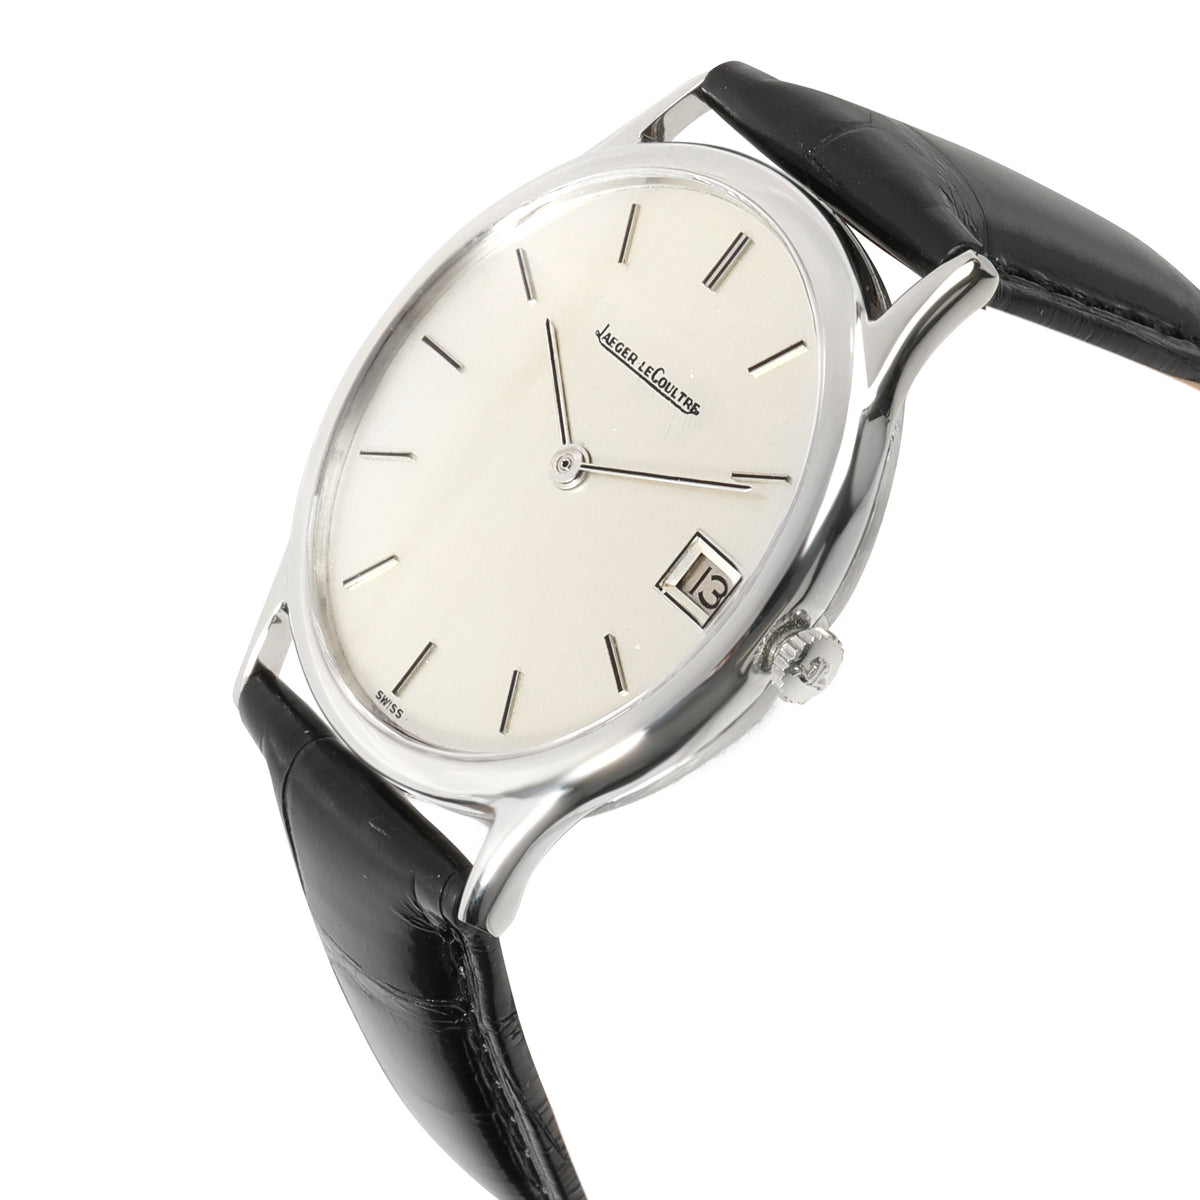 Jaeger-LeCoultre Oval Ellipse 5002.42 Unisex Watch in  Stainless Steel